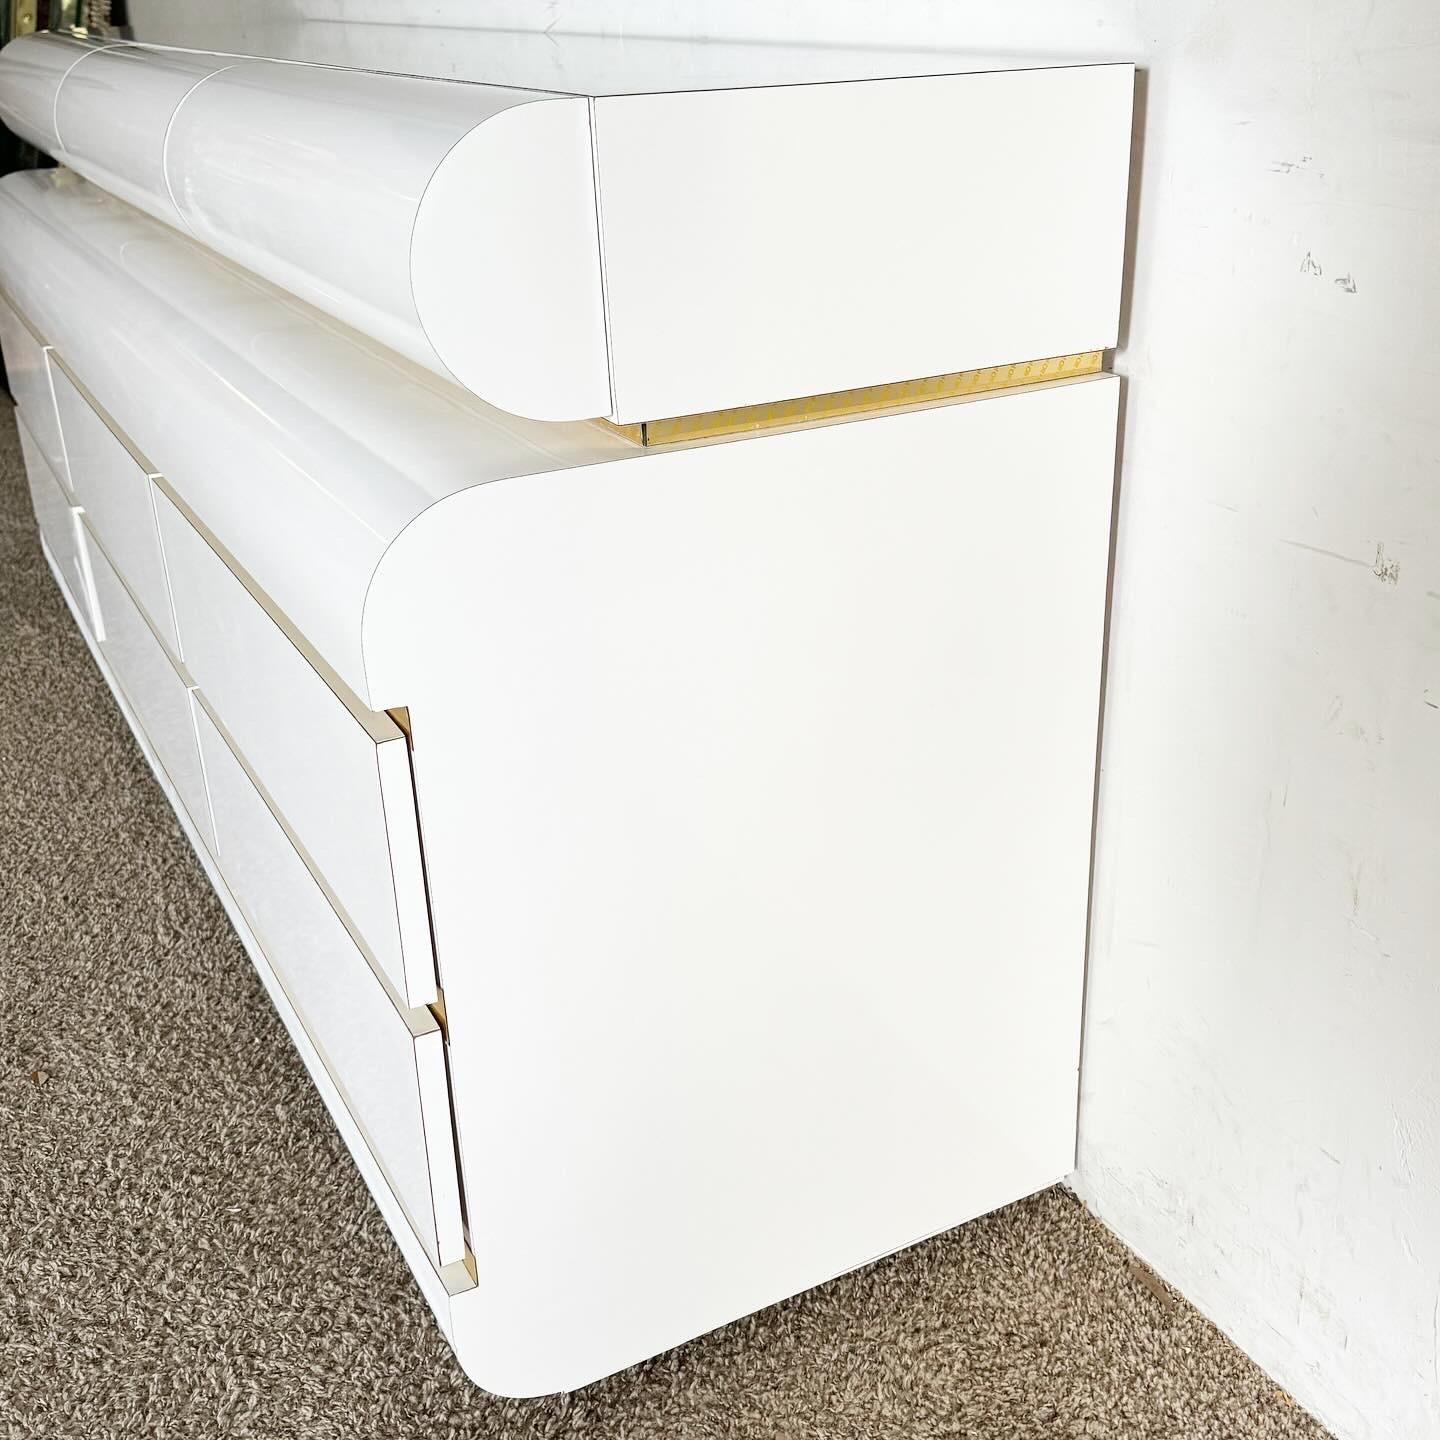 Postmodern White Laminate Bullnose Dresser With Removable Top and Gold Accents In Good Condition For Sale In Delray Beach, FL